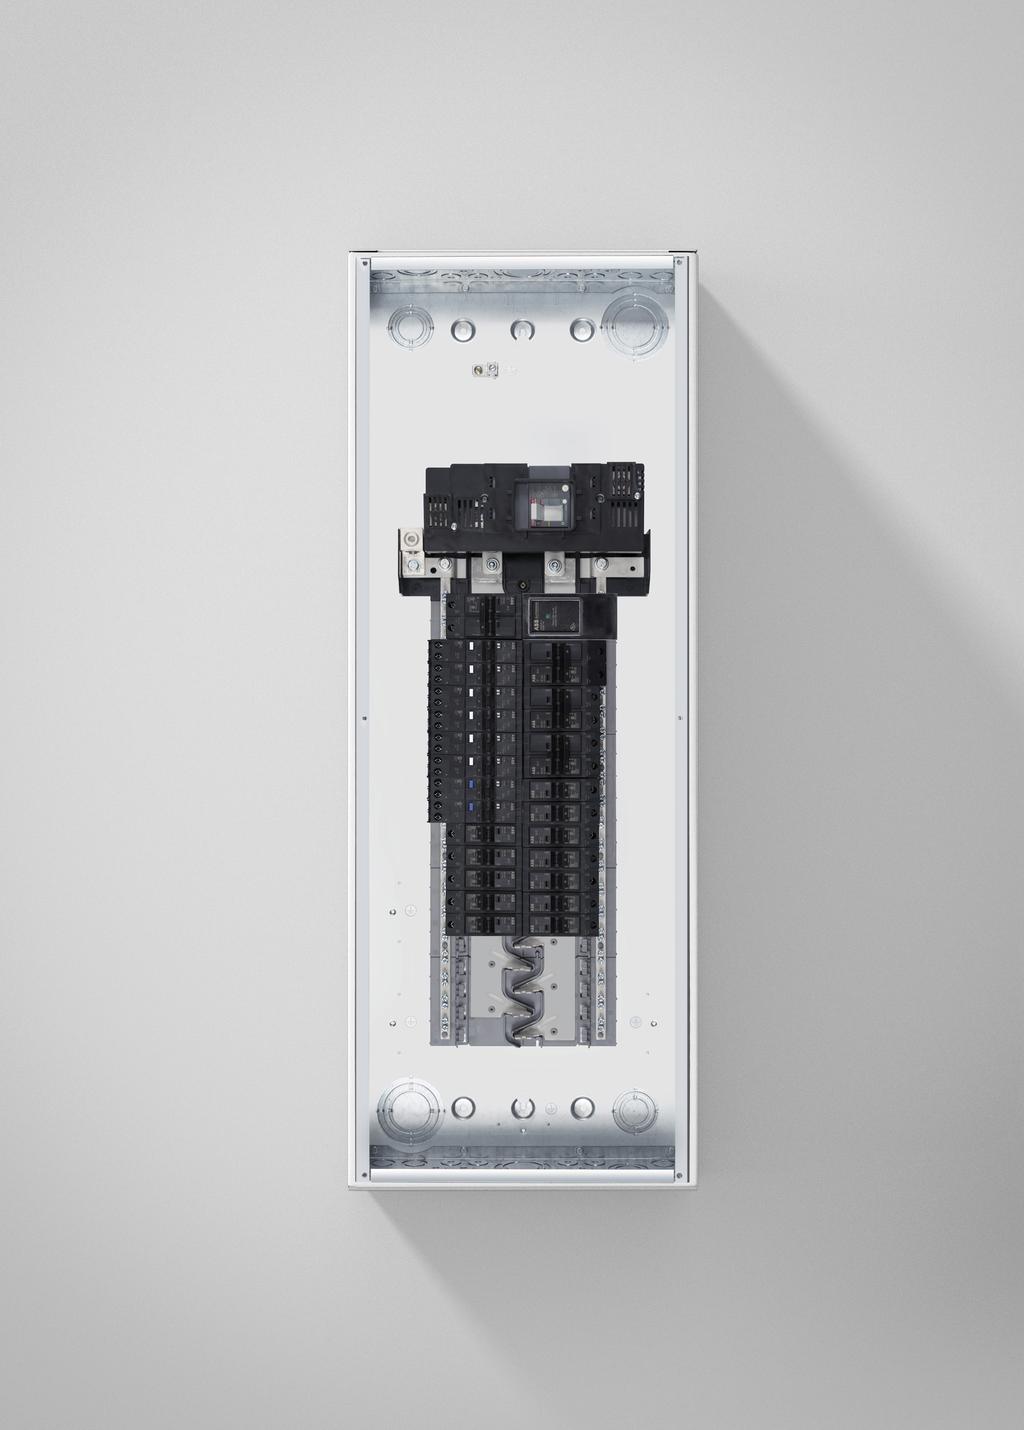 SENTRICITY LOAD CENTERS AND CIRCUIT BREAKERS 5 Keyhole mounting slots (both sides) Cover hanging slot IP20 finger-safe terminal and fail-safe terminal on all MCBs Service entrance conductor barrier